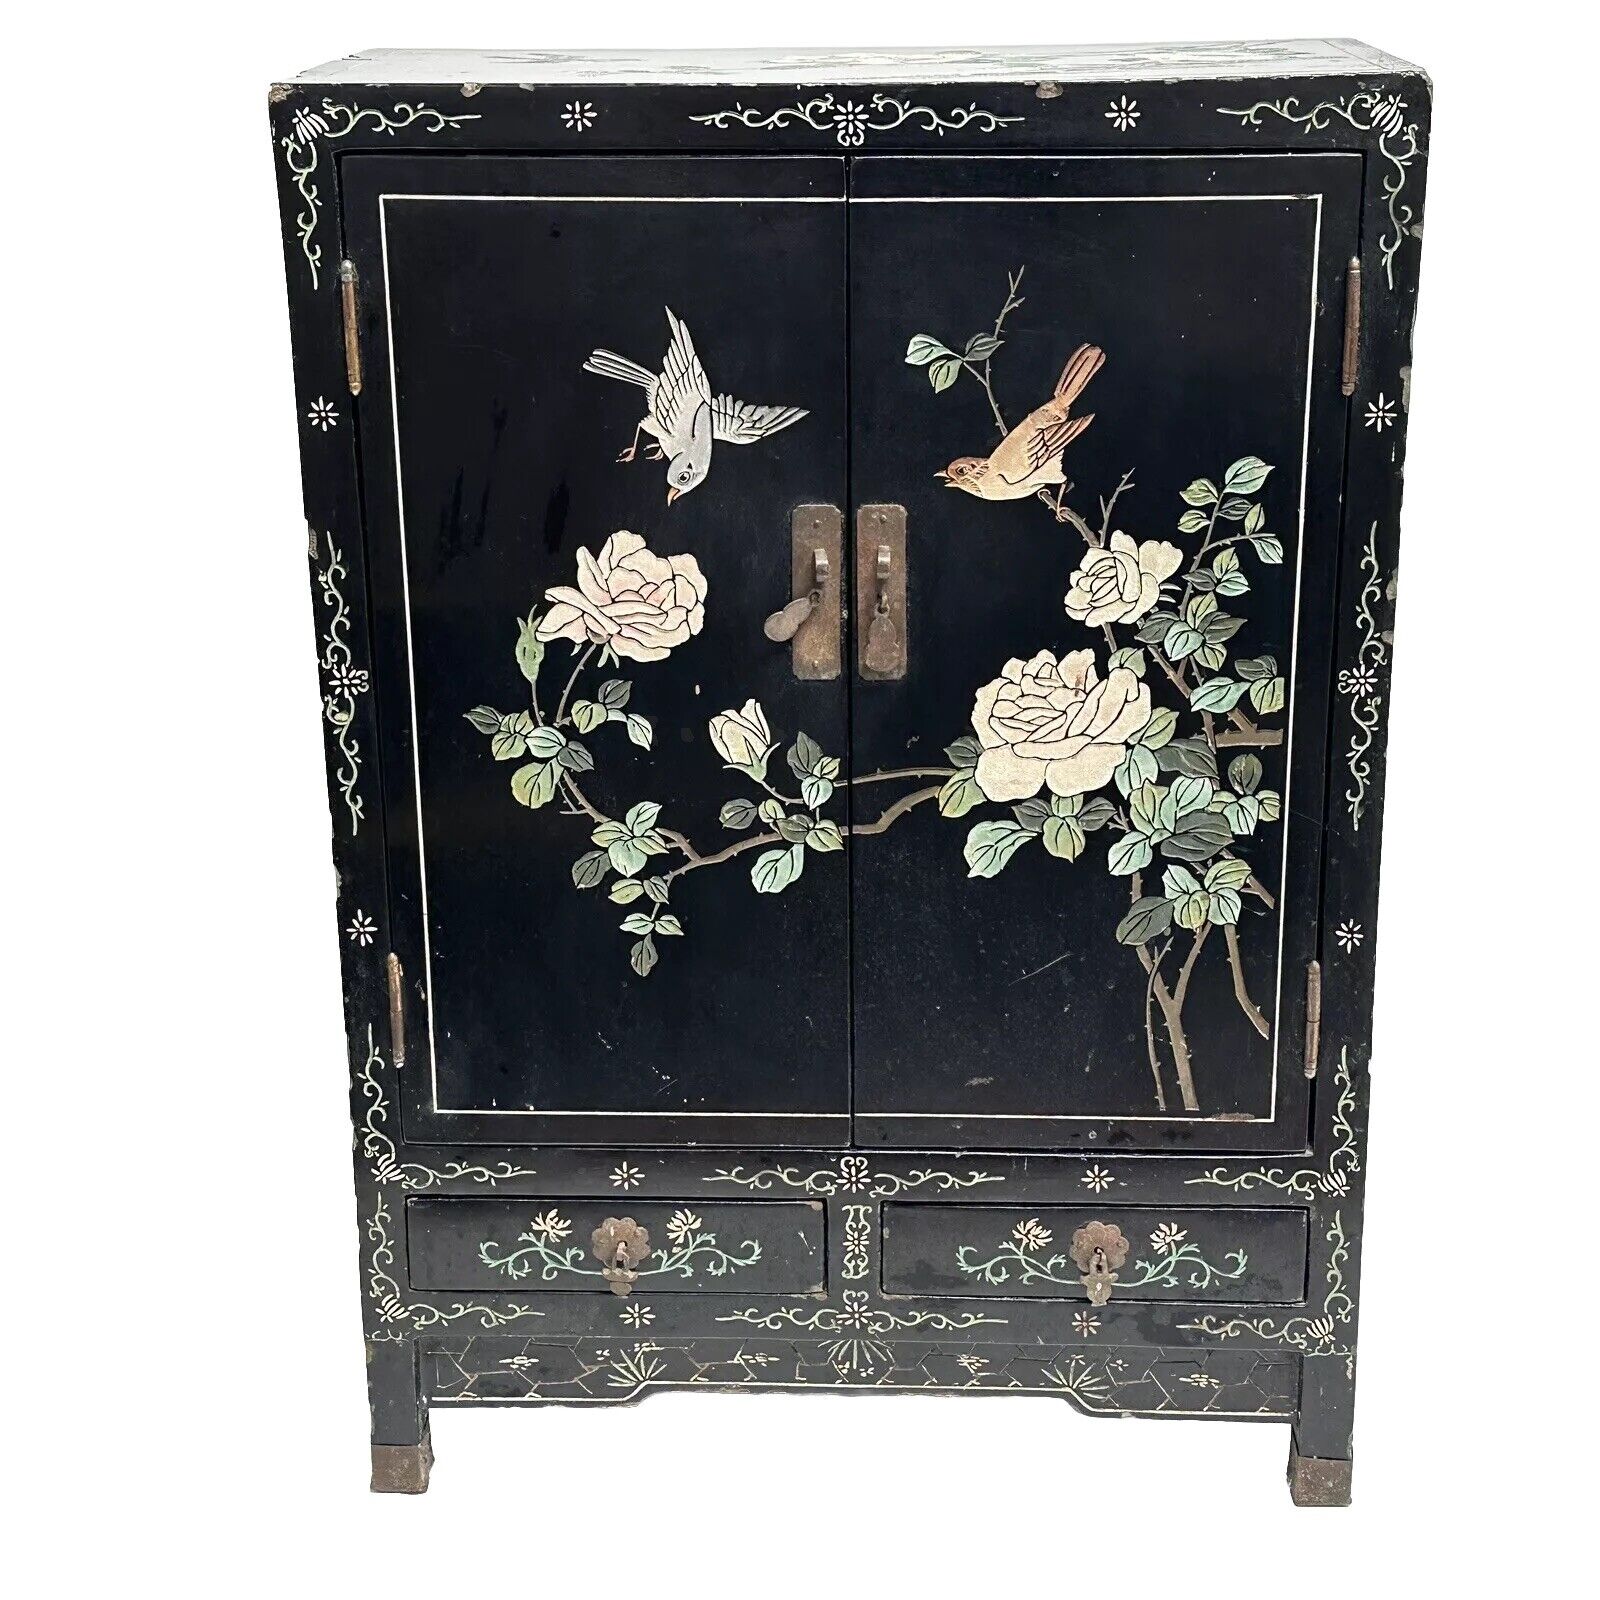 Vintage Hand Carved Asian Oriental Black Lacquer Jewelry Box Cabinet